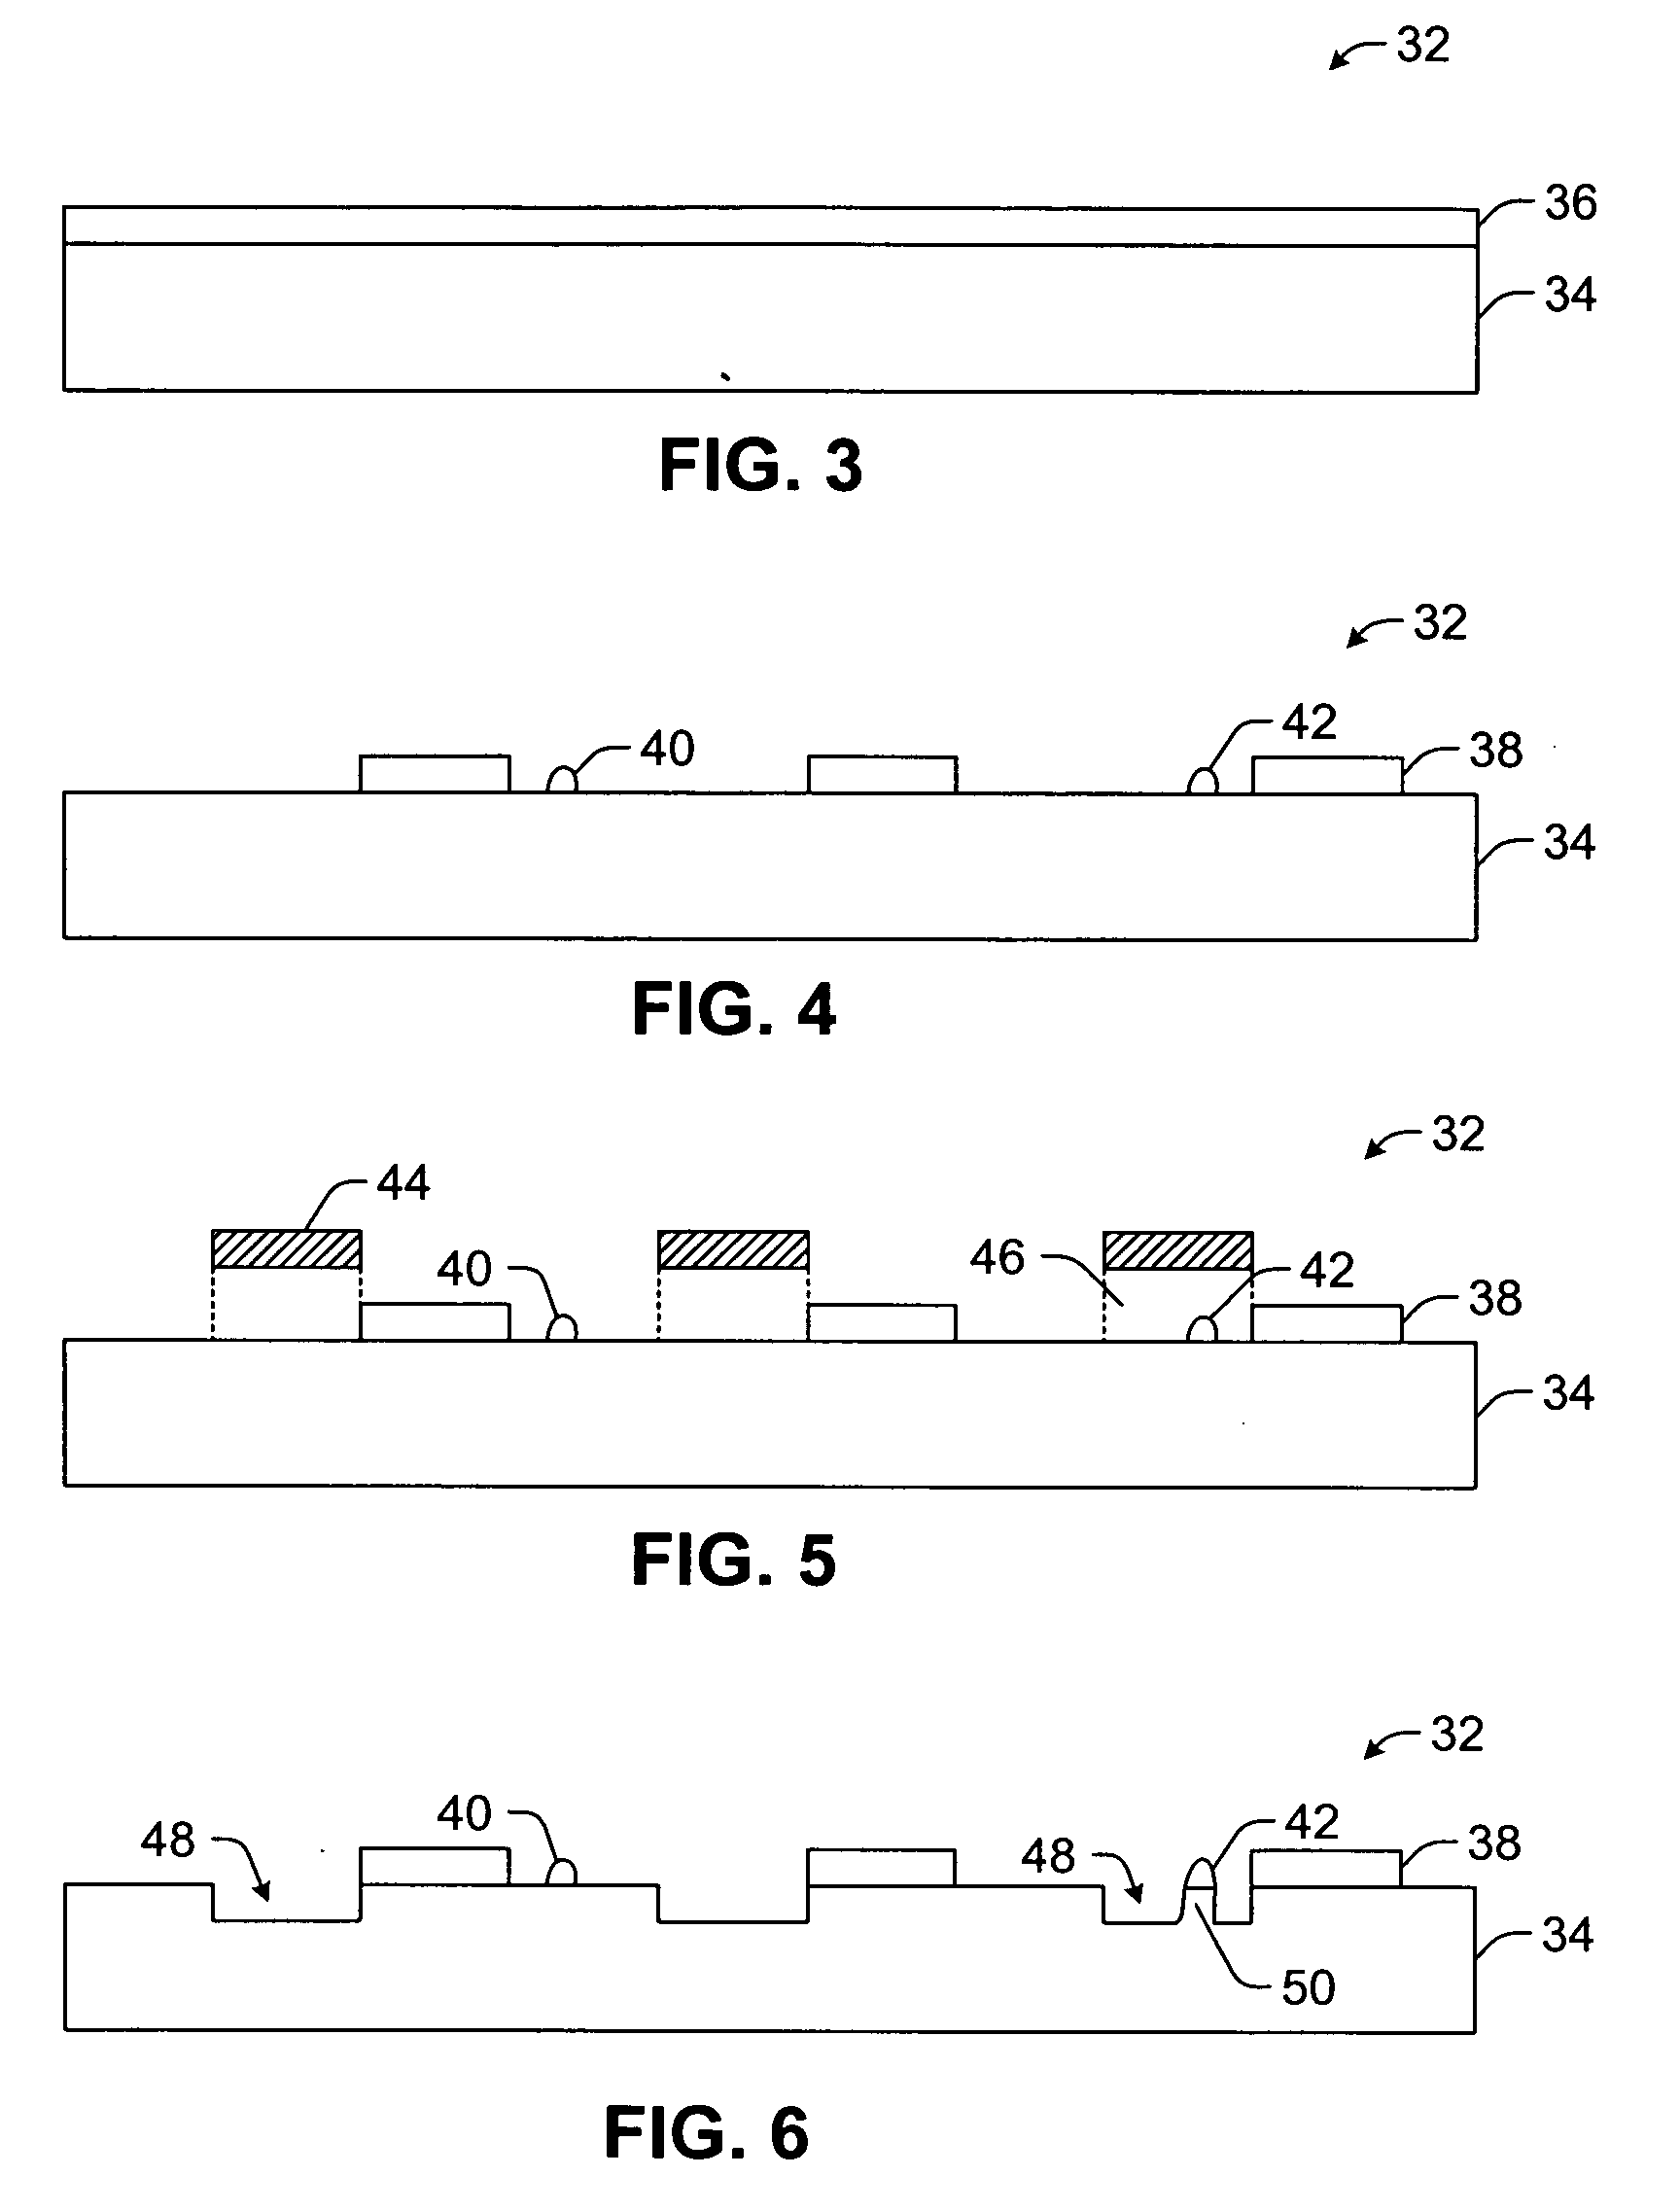 Computer-implemented methods for generating input for a simulation program or generating a simulated image of a reticle